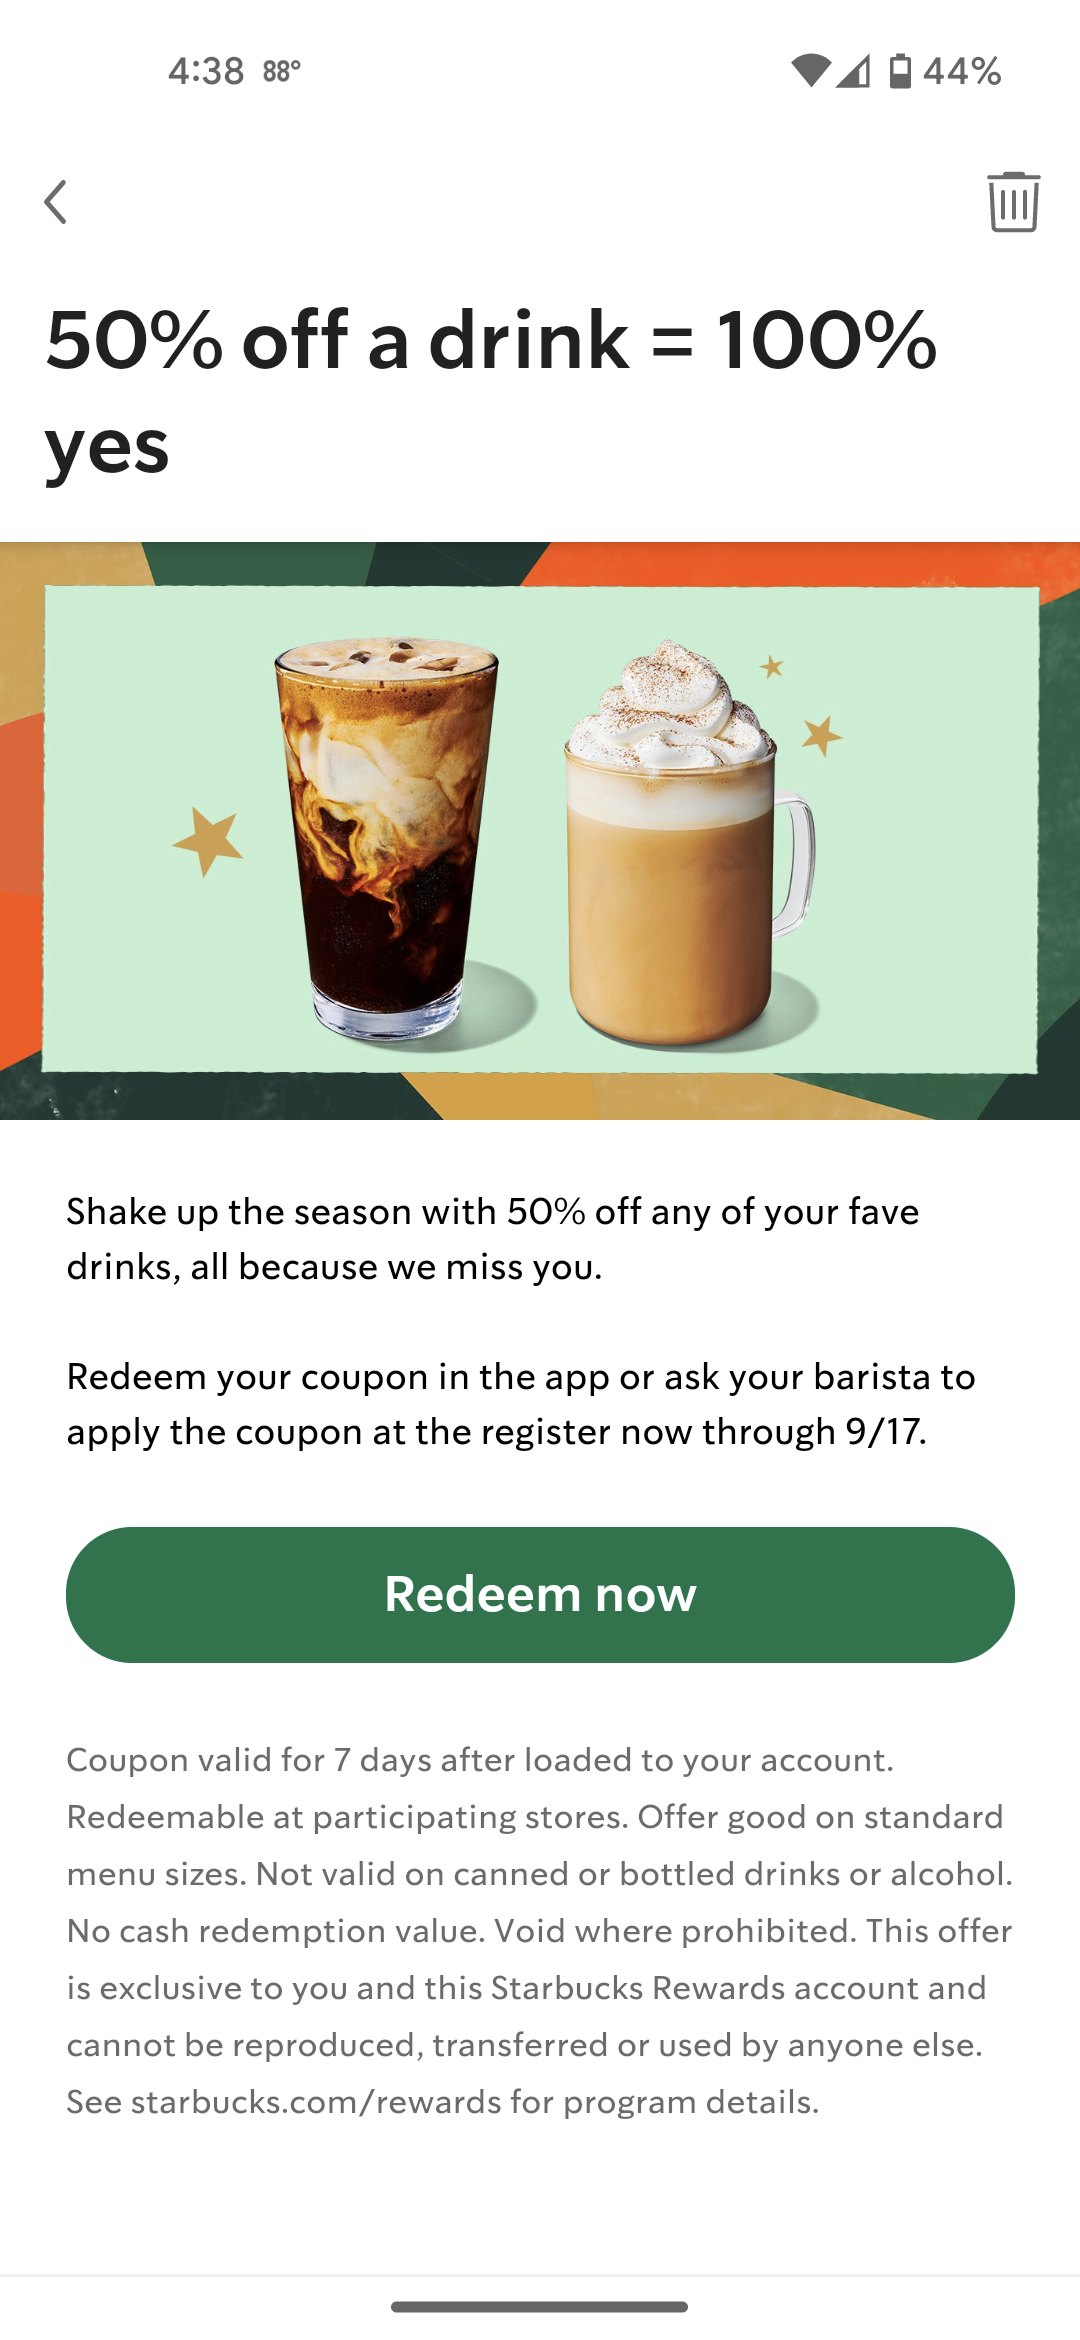 Starbucks "We Miss You" Offer: 50% Off Any Drink (YMMV / Select Accounts)